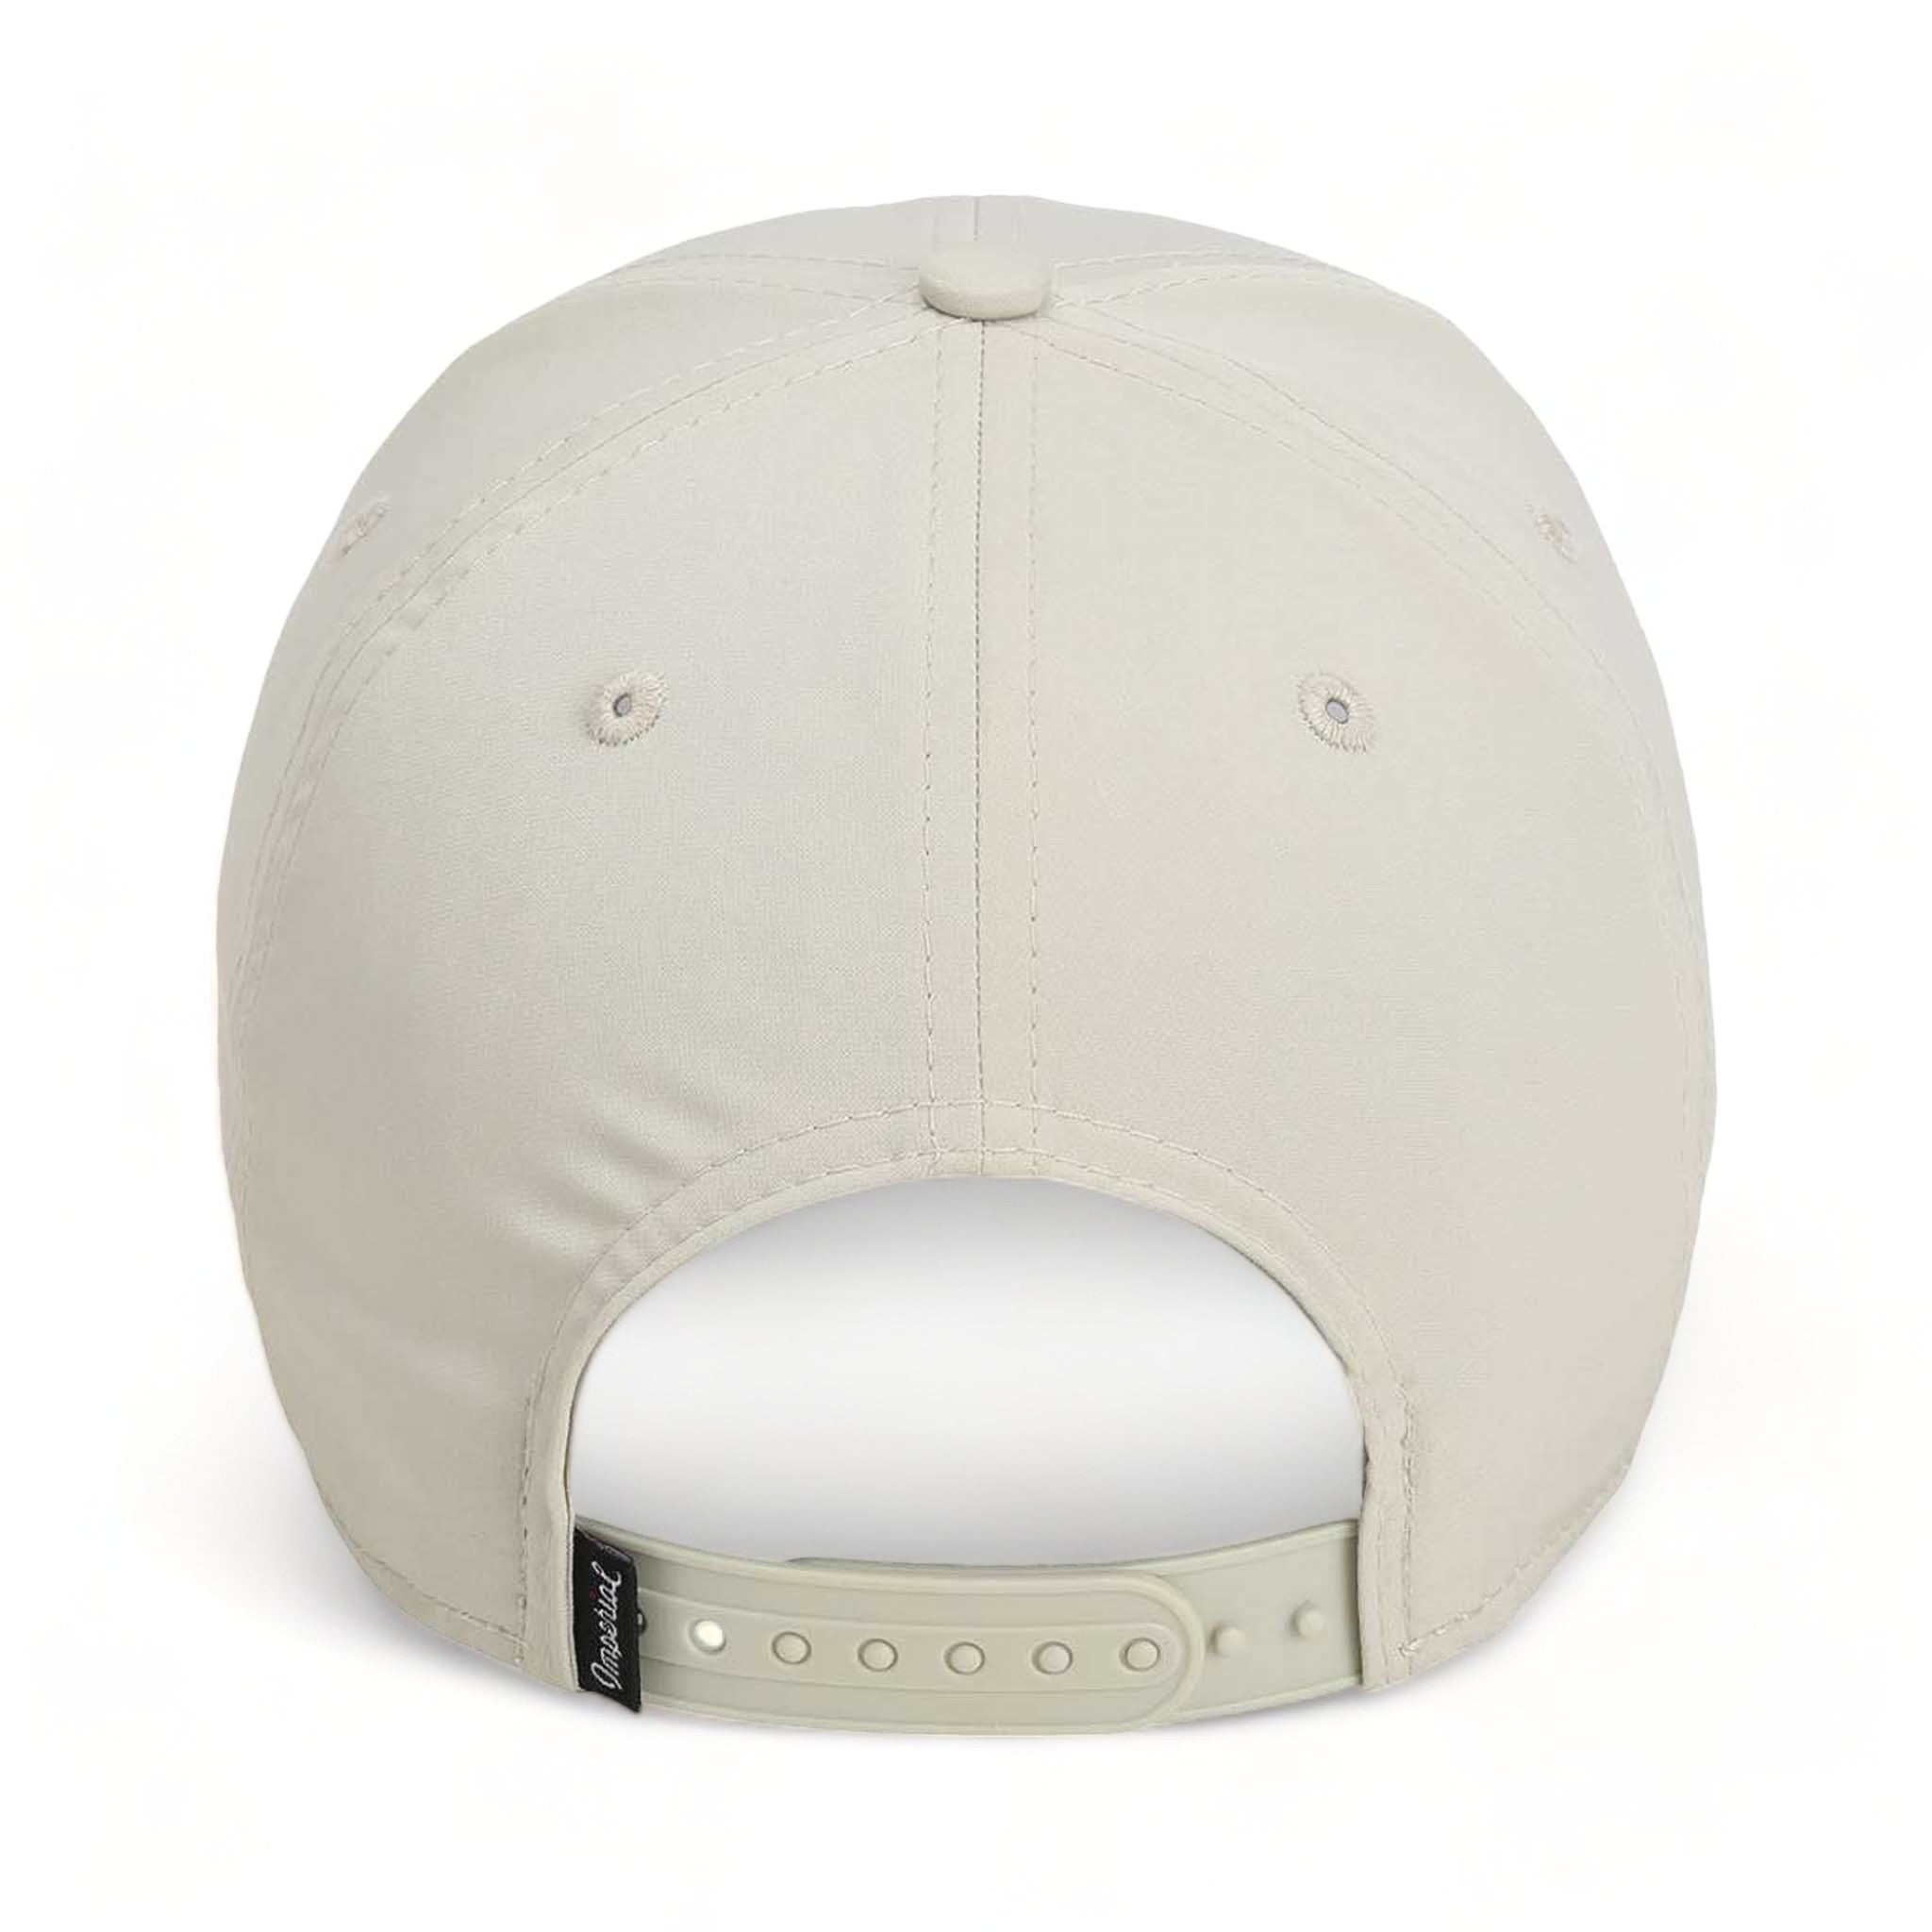 Back view of Imperial 7054 custom hat in putty and white